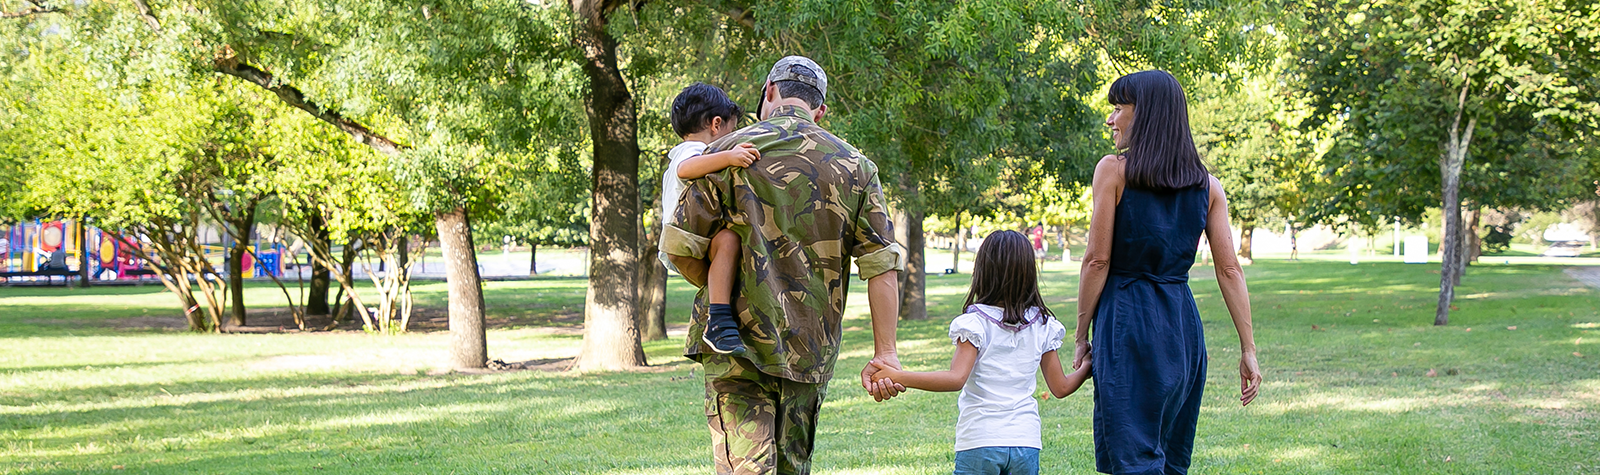 Buying or Selling with the Military? Top tips to consider.